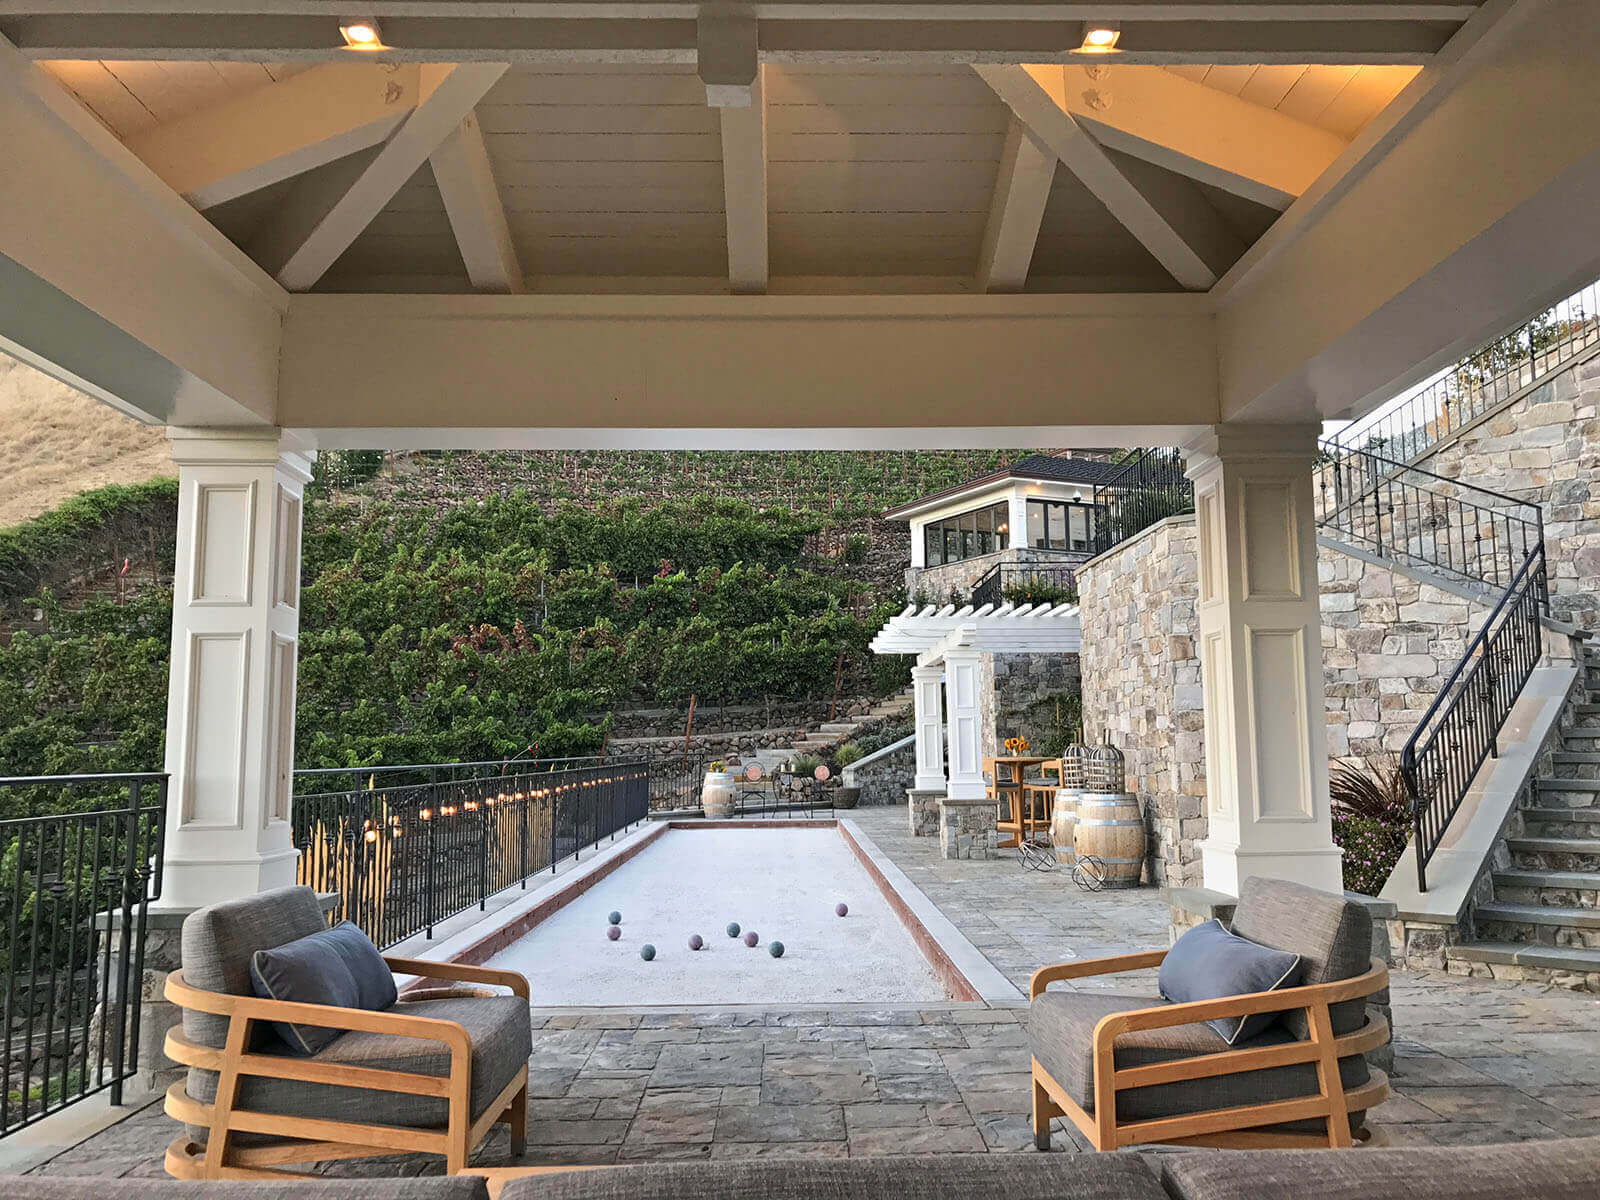 Pyramid-roofed white pergola covers lounge area at head of bocce ball court. Beyond, a slatted wood pergola, stone staircases and wrought-iron railings frame a view of the vineyard